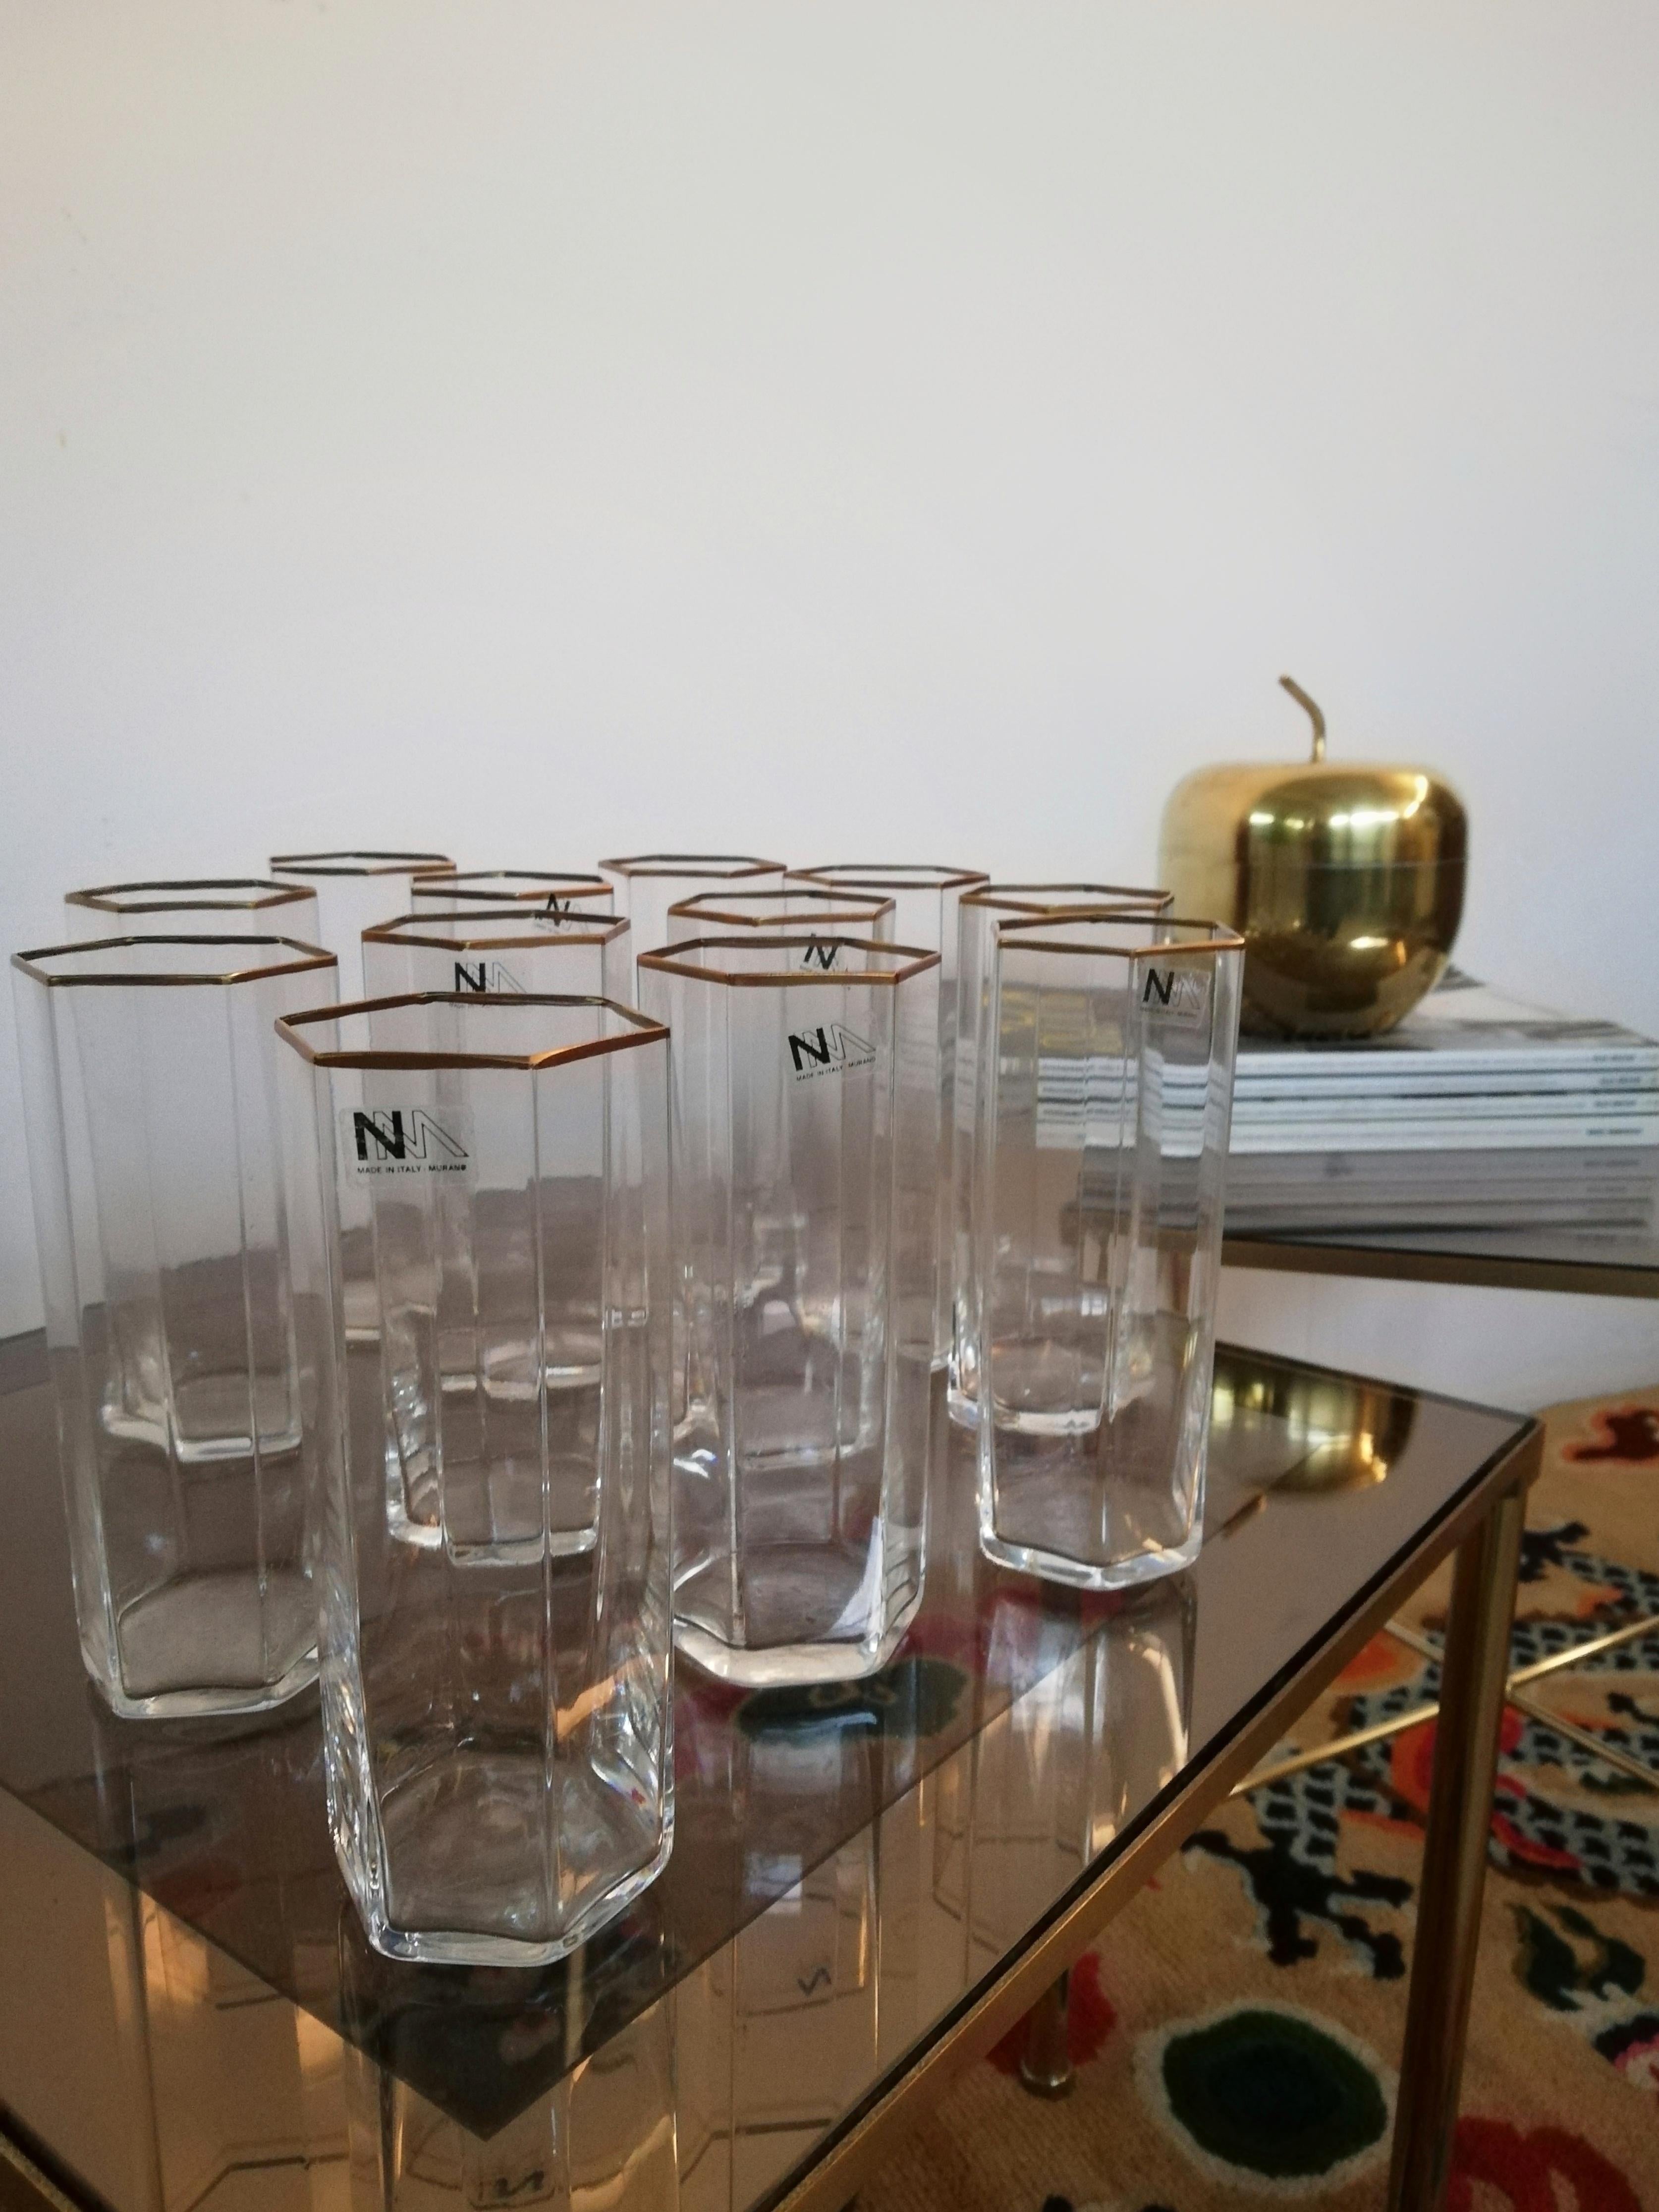 12 tumbler glasses dating from around the 1970s made by the well-known Murano company 